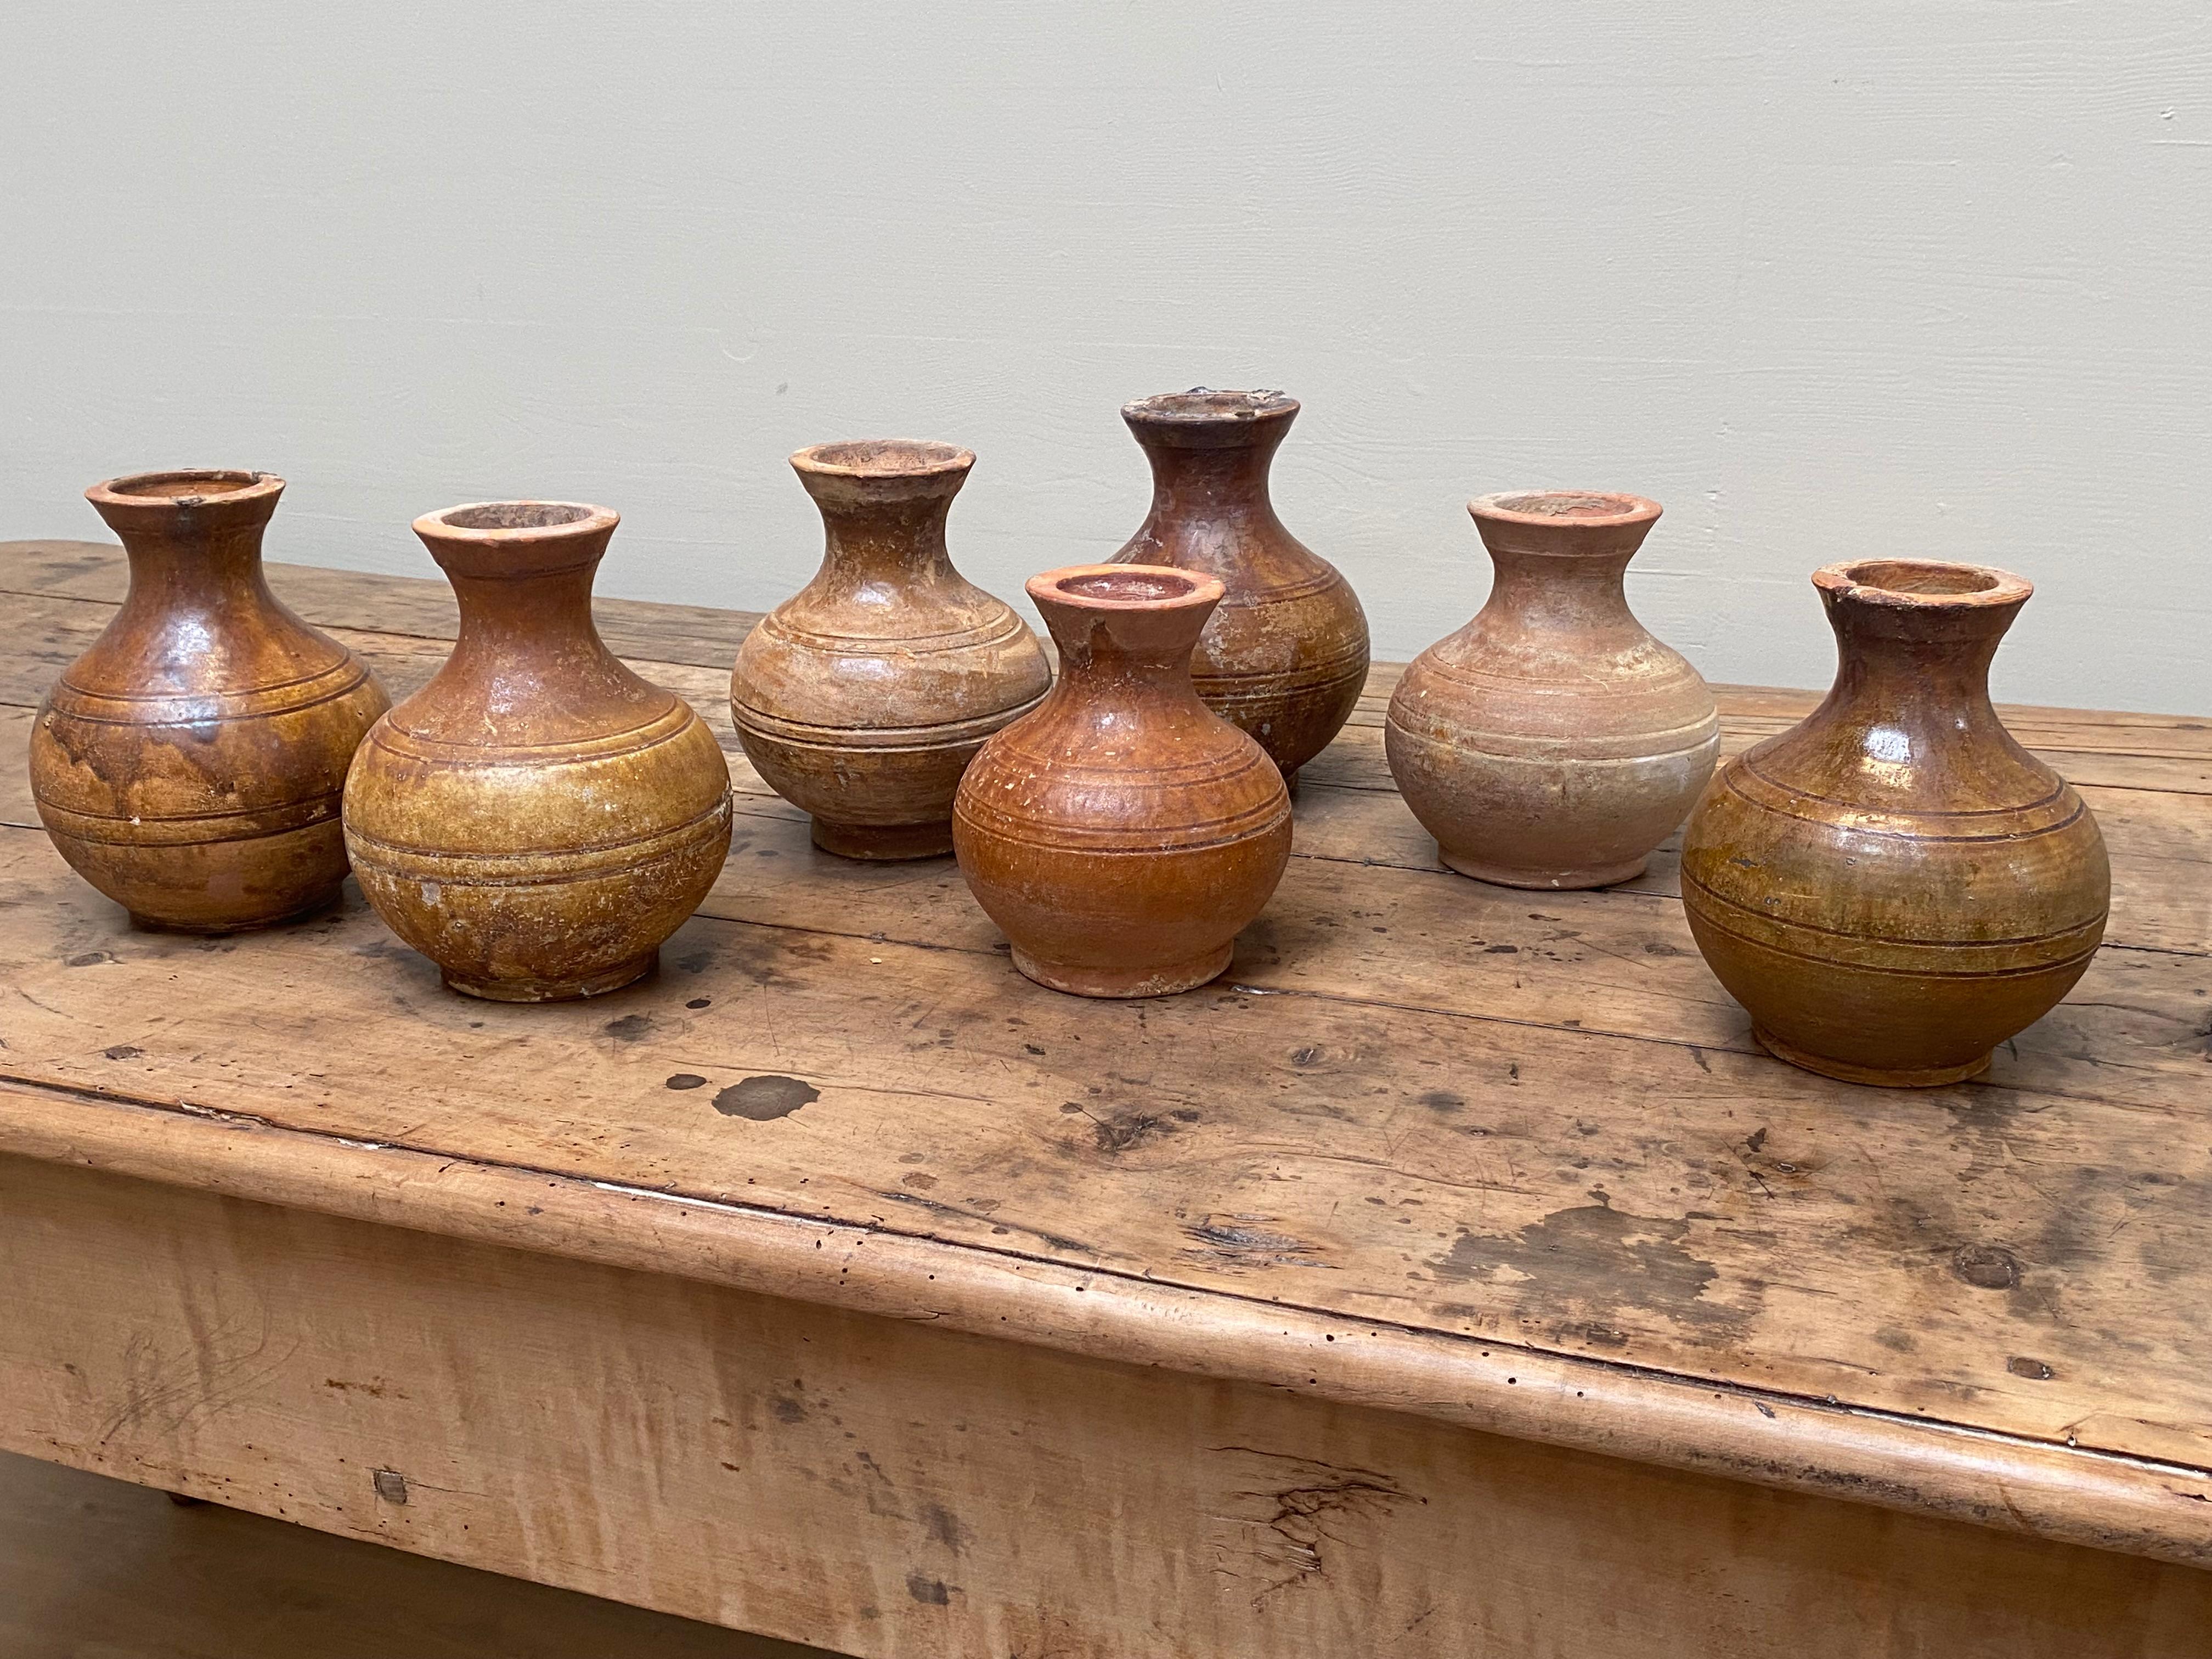 Exceptional  Terracotta Han vases in brown faded color,
China Han Period,approximately 2000 years old,
nice variety of the color brown,
warm and worn shine and correct antique patina, 
set of terracotta full of charm and authenticity.